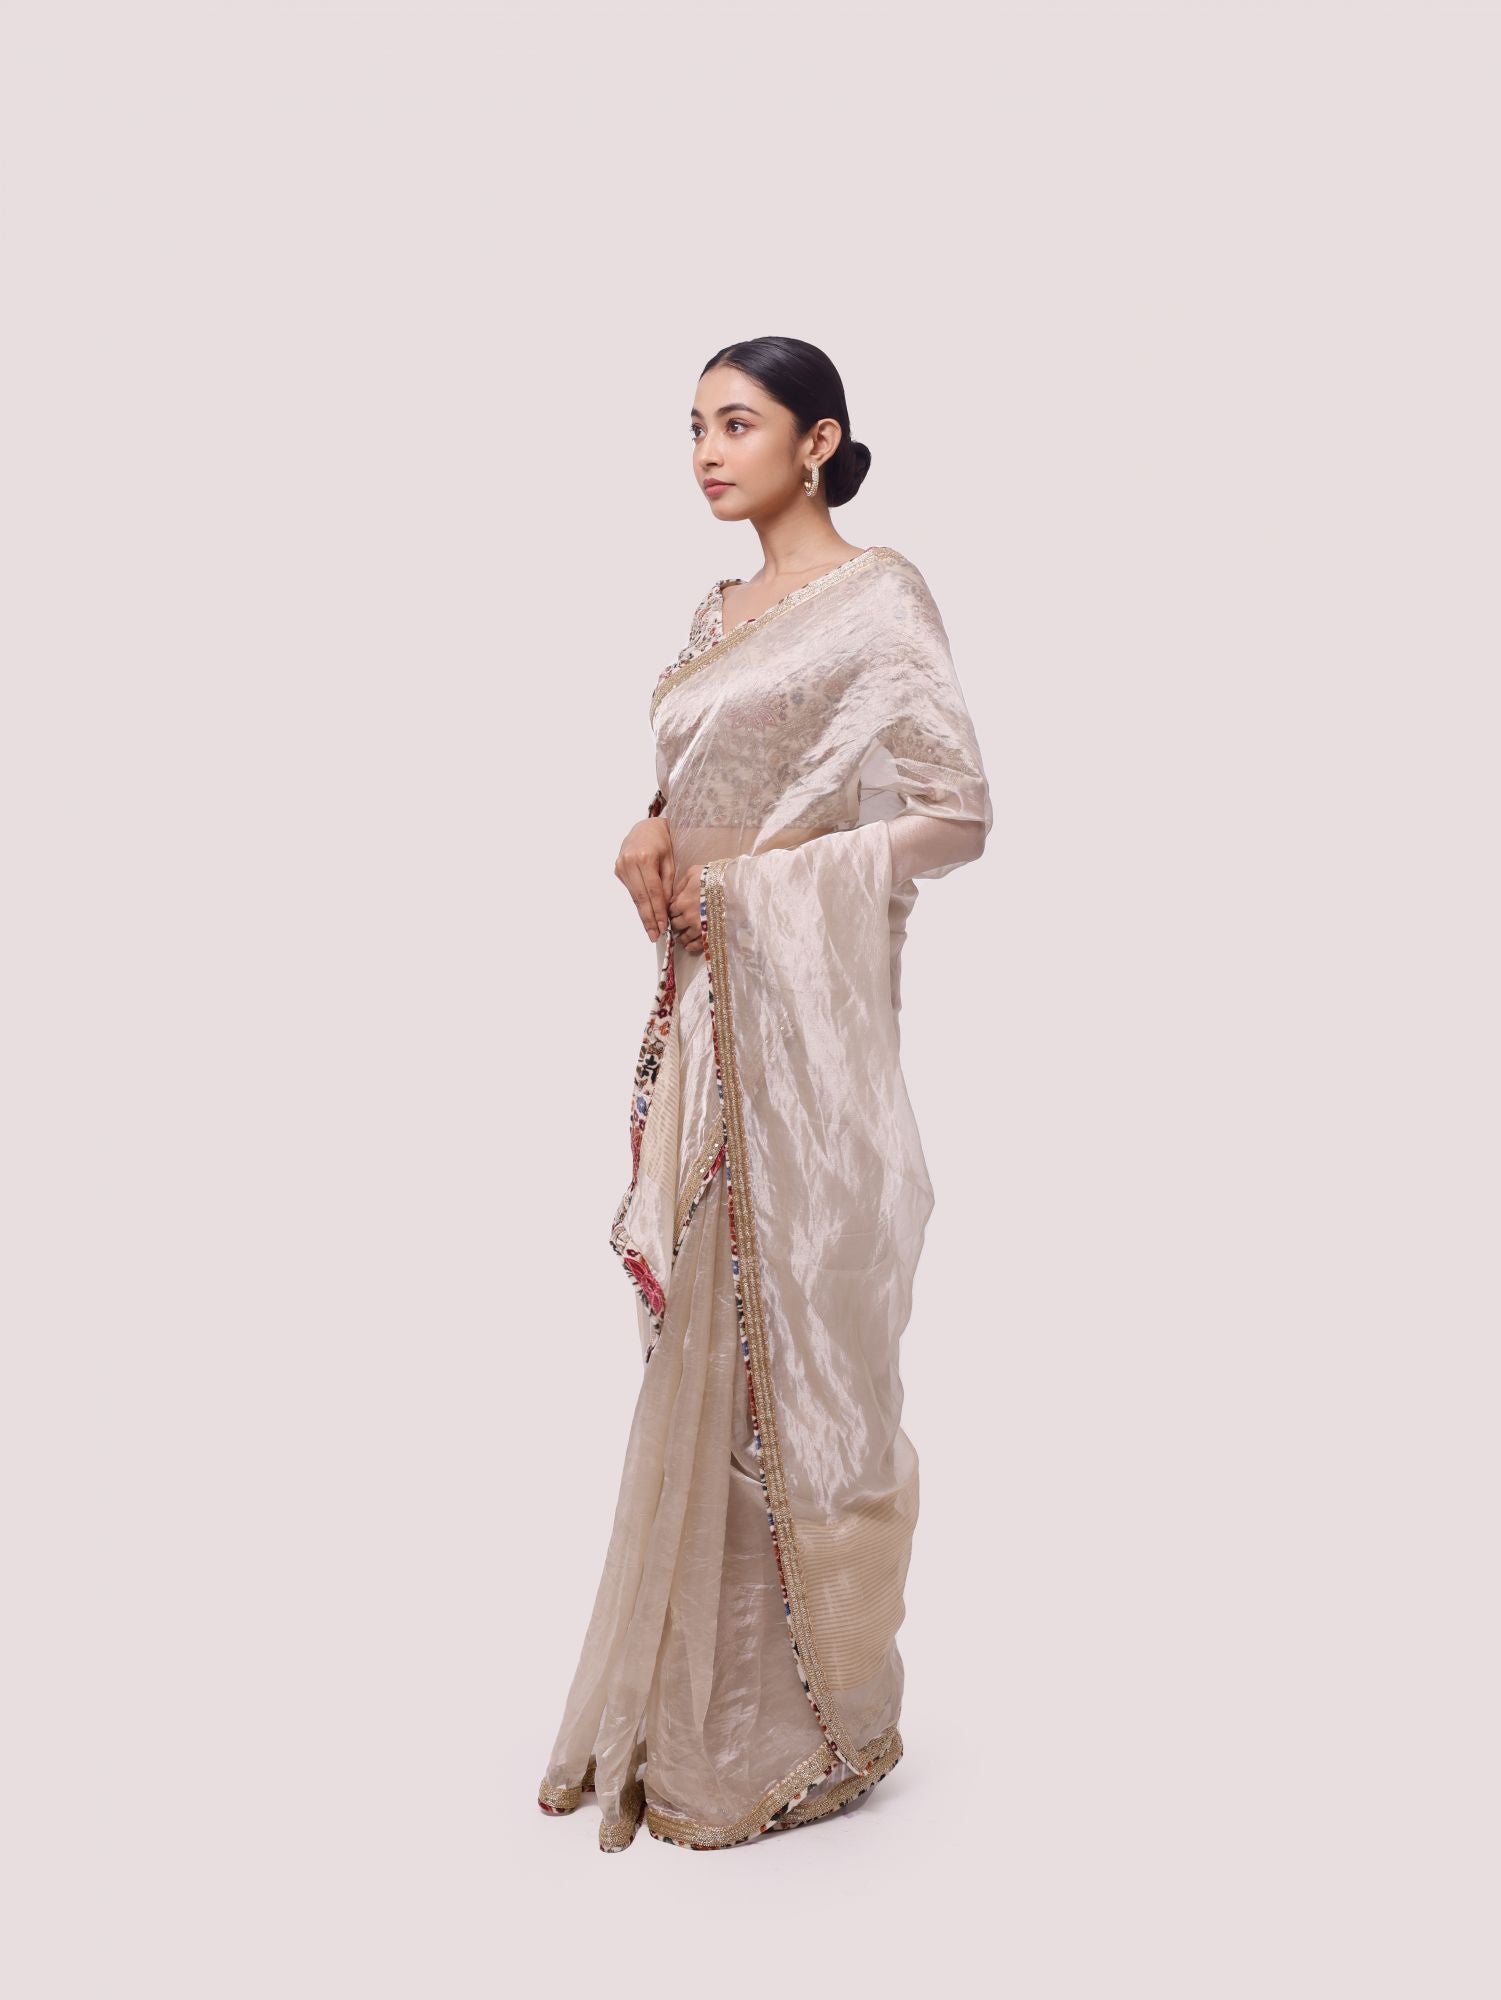 Shop beige handloom tissue saree online in USA with velvet saree blouse. Look your best at parties and weddings in beautiful designer sarees, embroidered sarees, handwoven sarees, silk sarees, organza saris from Pure Elegance Indian saree store in USA.-saree